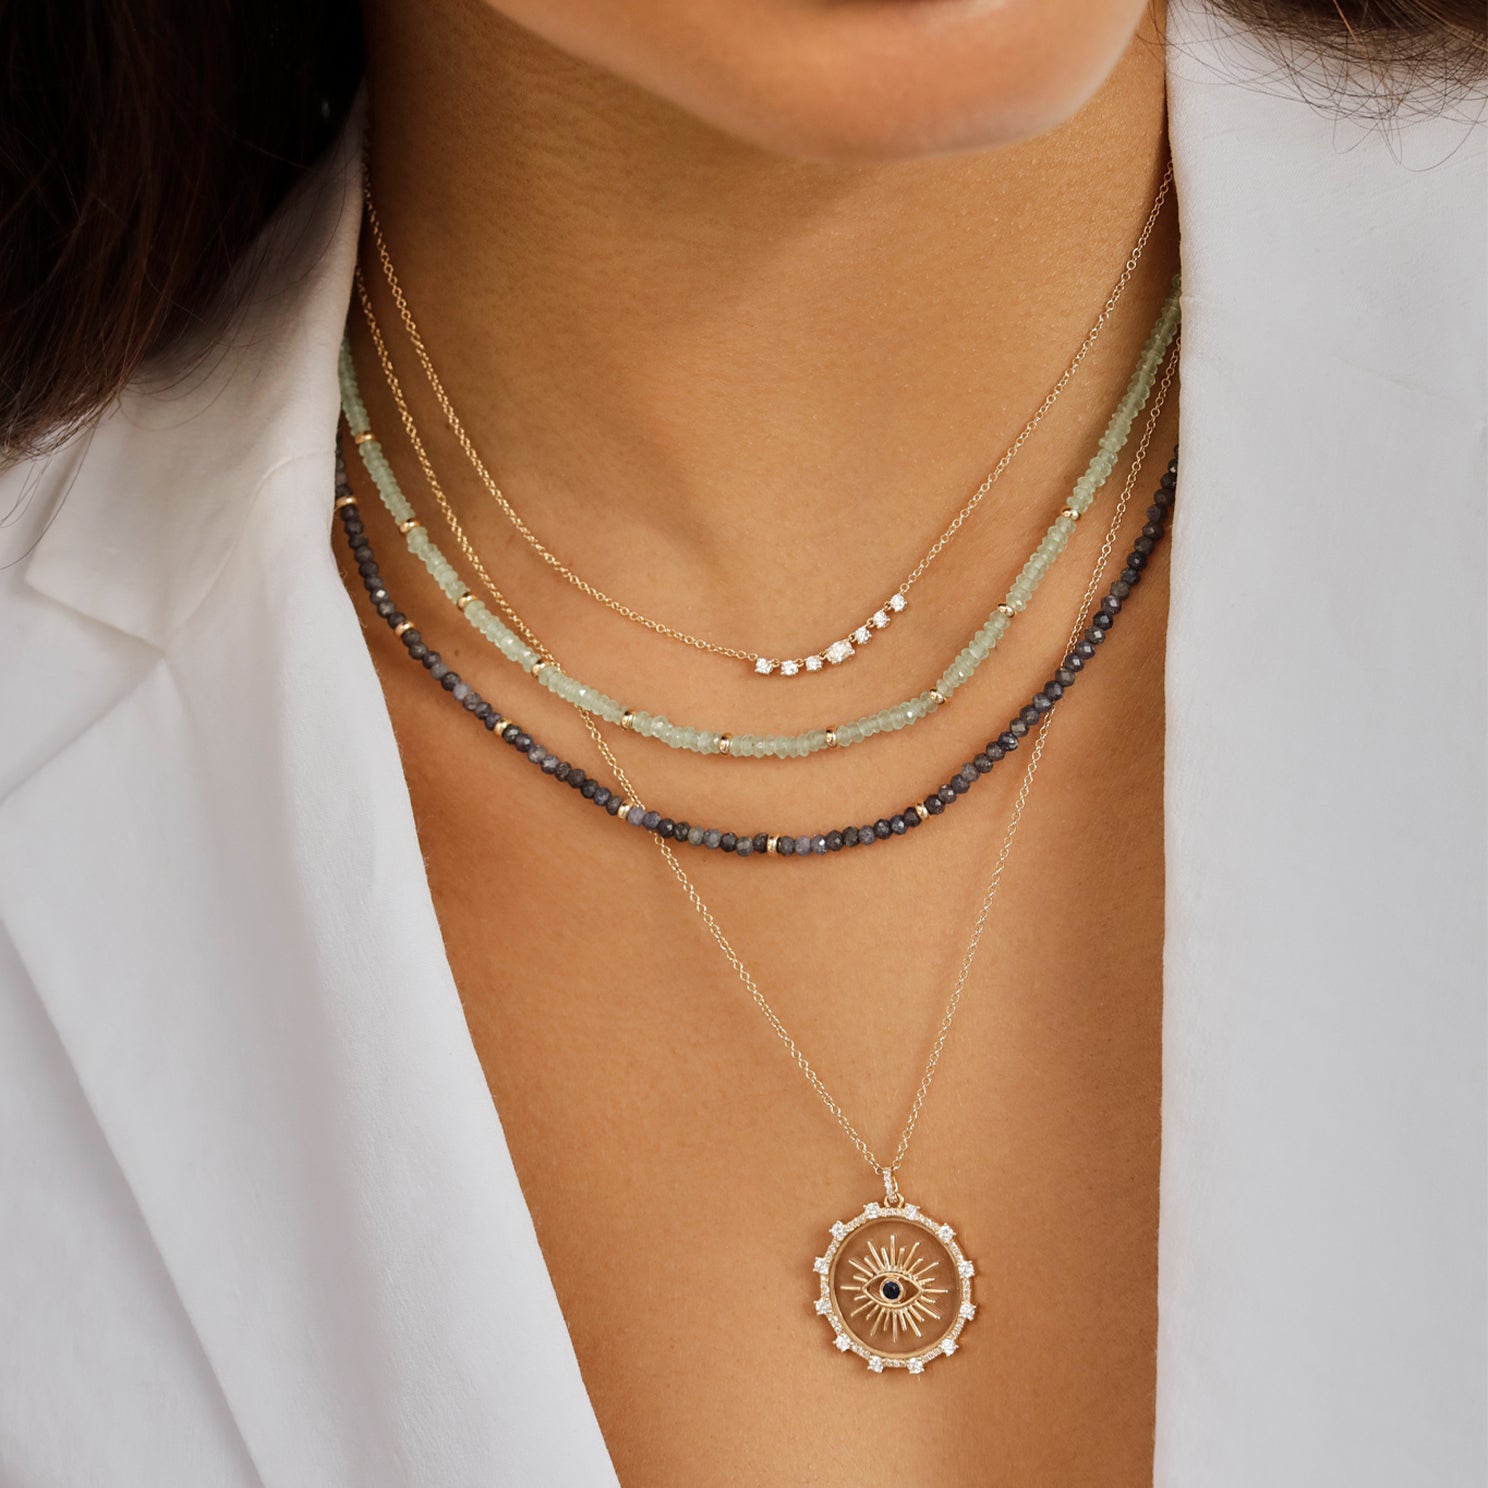 Diamond Carrie Necklace in 14k yellow gold styled on neck of model with birthstone bead and evil eye necklaces